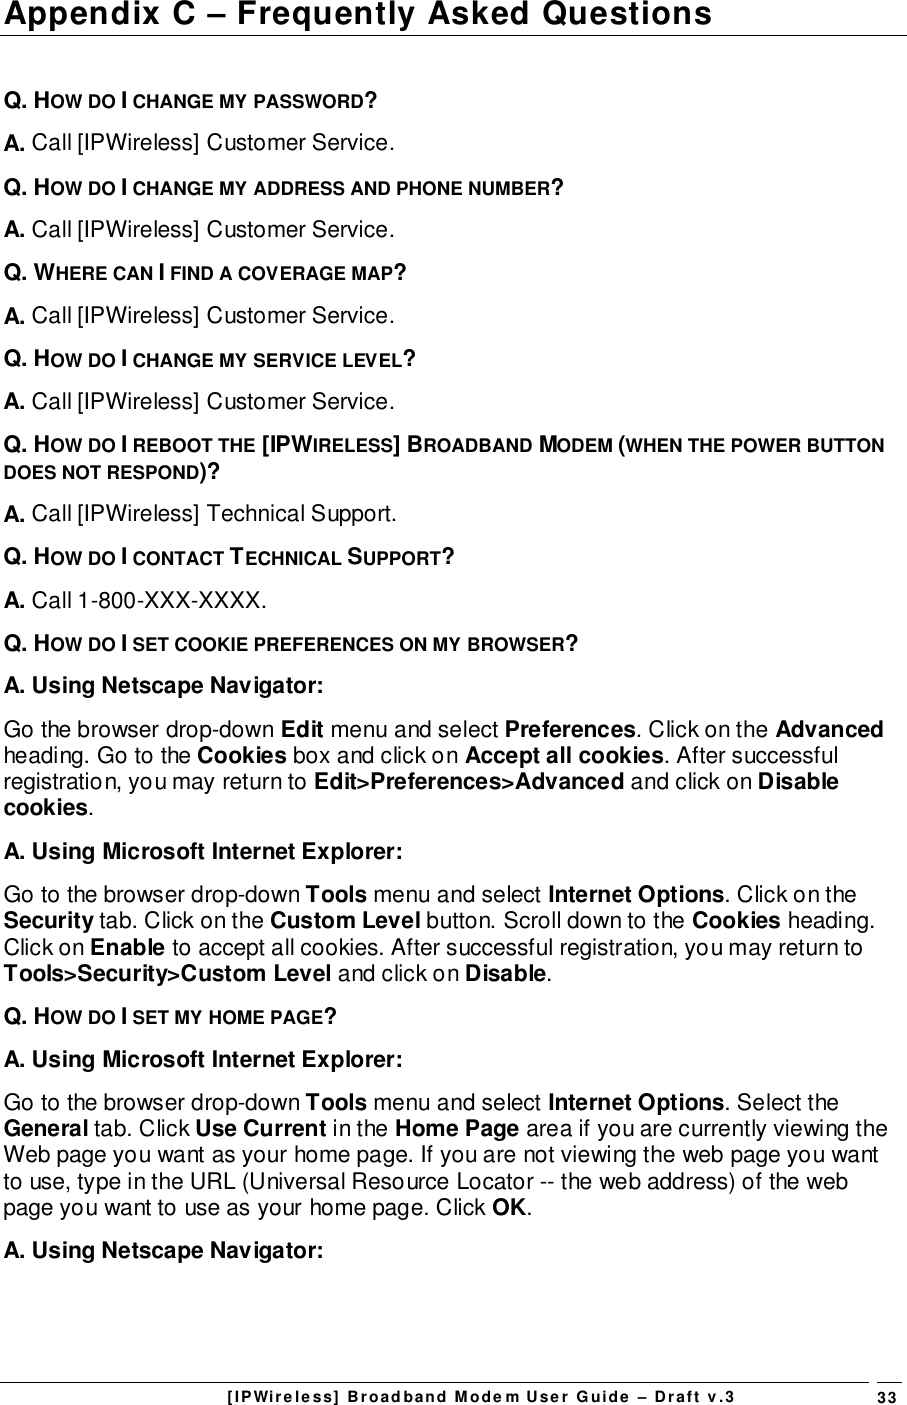 [IPWireless] Broadband Modem User Guide – Draft v.3 33Appendix C – Frequently Asked QuestionsQ. HOW DO I CHANGE MY PASSWORD?A. Call [IPWireless] Customer Service.Q. HOW DO I CHANGE MY ADDRESS AND PHONE NUMBER?A. Call [IPWireless] Customer Service.Q. WHERE CAN I FIND A COVERAGE MAP?A. Call [IPWireless] Customer Service.Q. HOW DO I CHANGE MY SERVICE LEVEL?A. Call [IPWireless] Customer Service.Q. HOW DO I REBOOT THE [IPWIRELESS] BROADBAND MODEM (WHEN THE POWER BUTTONDOES NOT RESPOND)?A. Call [IPWireless] Technical Support.Q. HOW DO I CONTACT TECHNICAL SUPPORT?A. Call 1-800-XXX-XXXX.Q. HOW DO I SET COOKIE PREFERENCES ON MY BROWSER?A. Using Netscape Navigator:Go the browser drop-down Edit menu and select Preferences. Click on the Advancedheading. Go to the Cookies box and click on Accept all cookies. After successfulregistration, you may return to Edit&gt;Preferences&gt;Advanced and click on Disablecookies.A. Using Microsoft Internet Explorer:Go to the browser drop-down Tools menu and select Internet Options. Click on theSecurity tab. Click on the Custom Level button. Scroll down to the Cookies heading.Click on Enable to accept all cookies. After successful registration, you may return toTools&gt;Security&gt;Custom Level and click on Disable.Q. HOW DO I SET MY HOME PAGE?A. Using Microsoft Internet Explorer:Go to the browser drop-down Tools menu and select Internet Options. Select theGeneral tab. Click Use Current in the Home Page area if you are currently viewing theWeb page you want as your home page. If you are not viewing the web page you wantto use, type in the URL (Universal Resource Locator -- the web address) of the webpage you want to use as your home page. Click OK.A. Using Netscape Navigator: